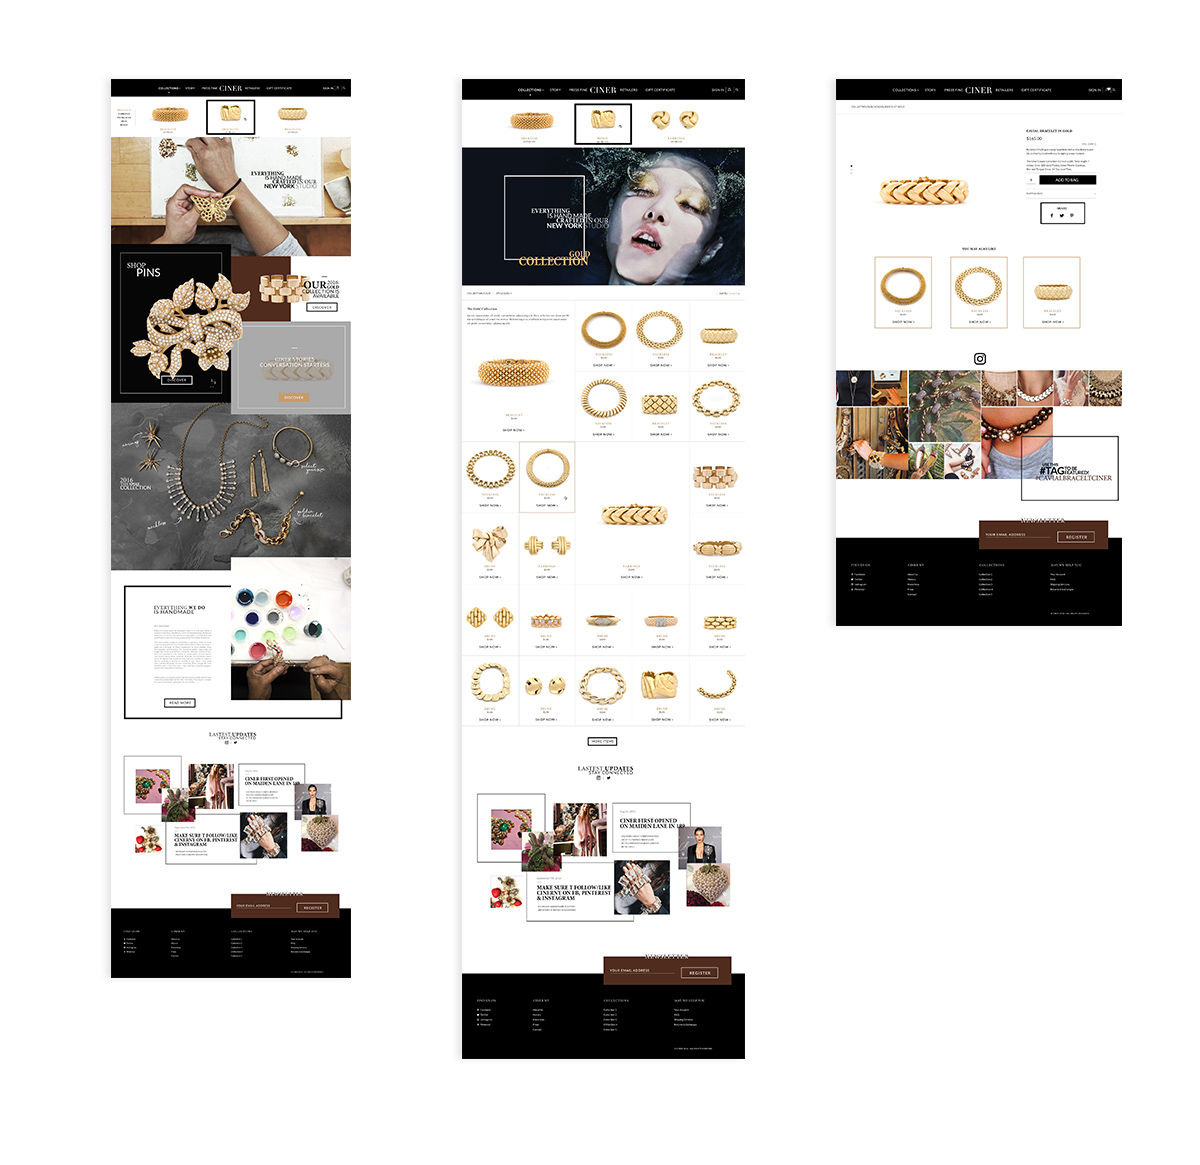 Ciner_project-layout-Test